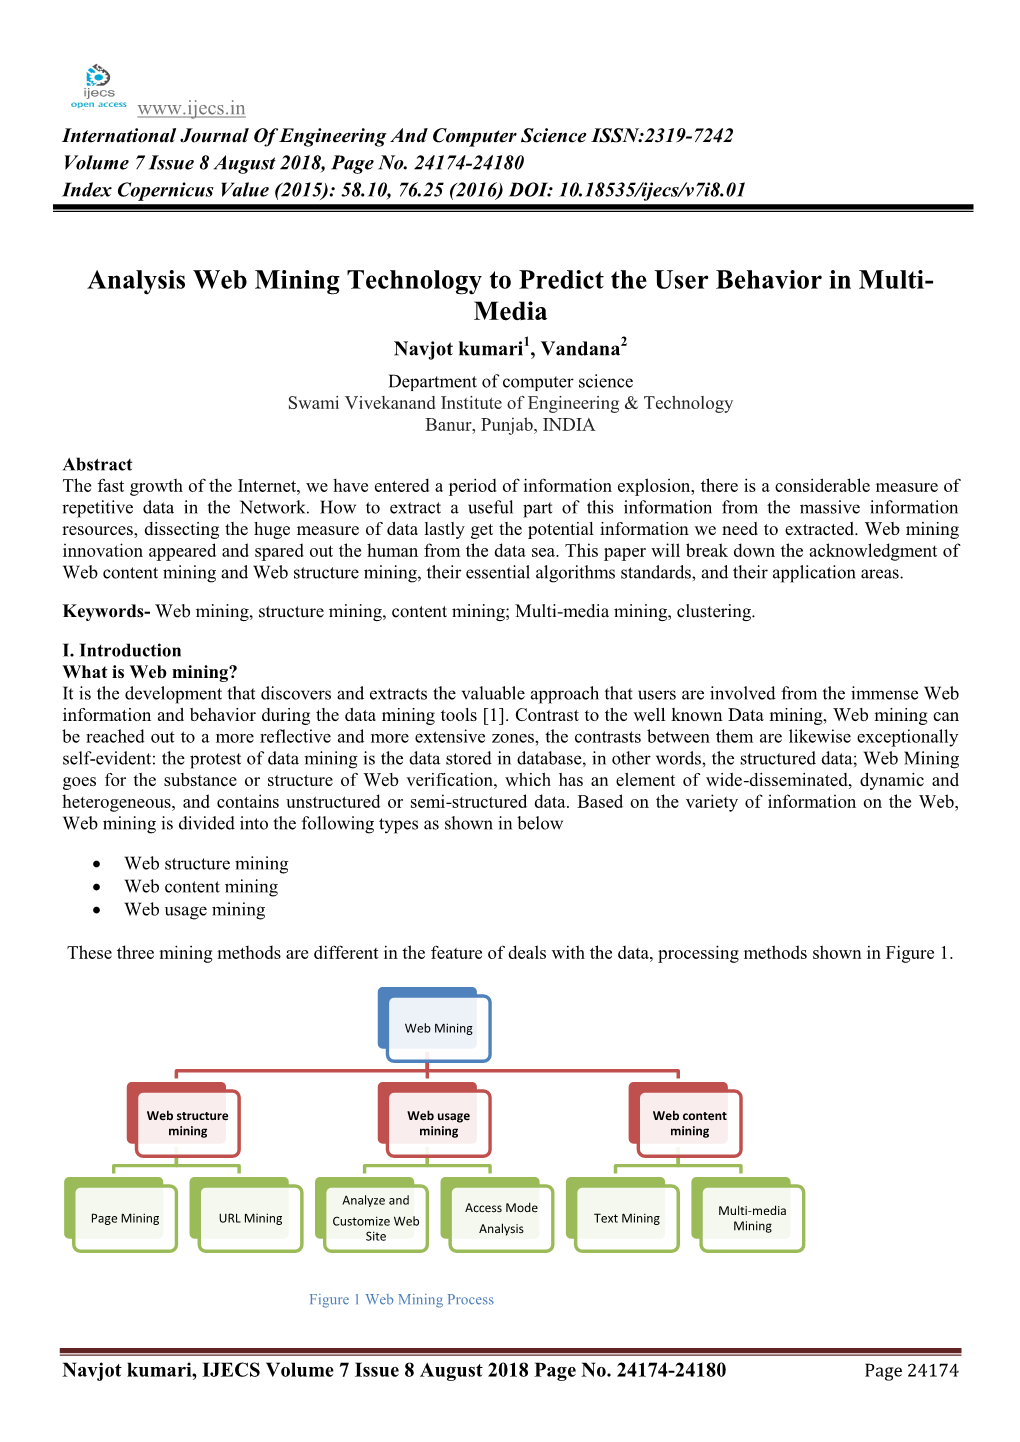 Analysis Web Mining Technology to Predict the User Behavior in Multi